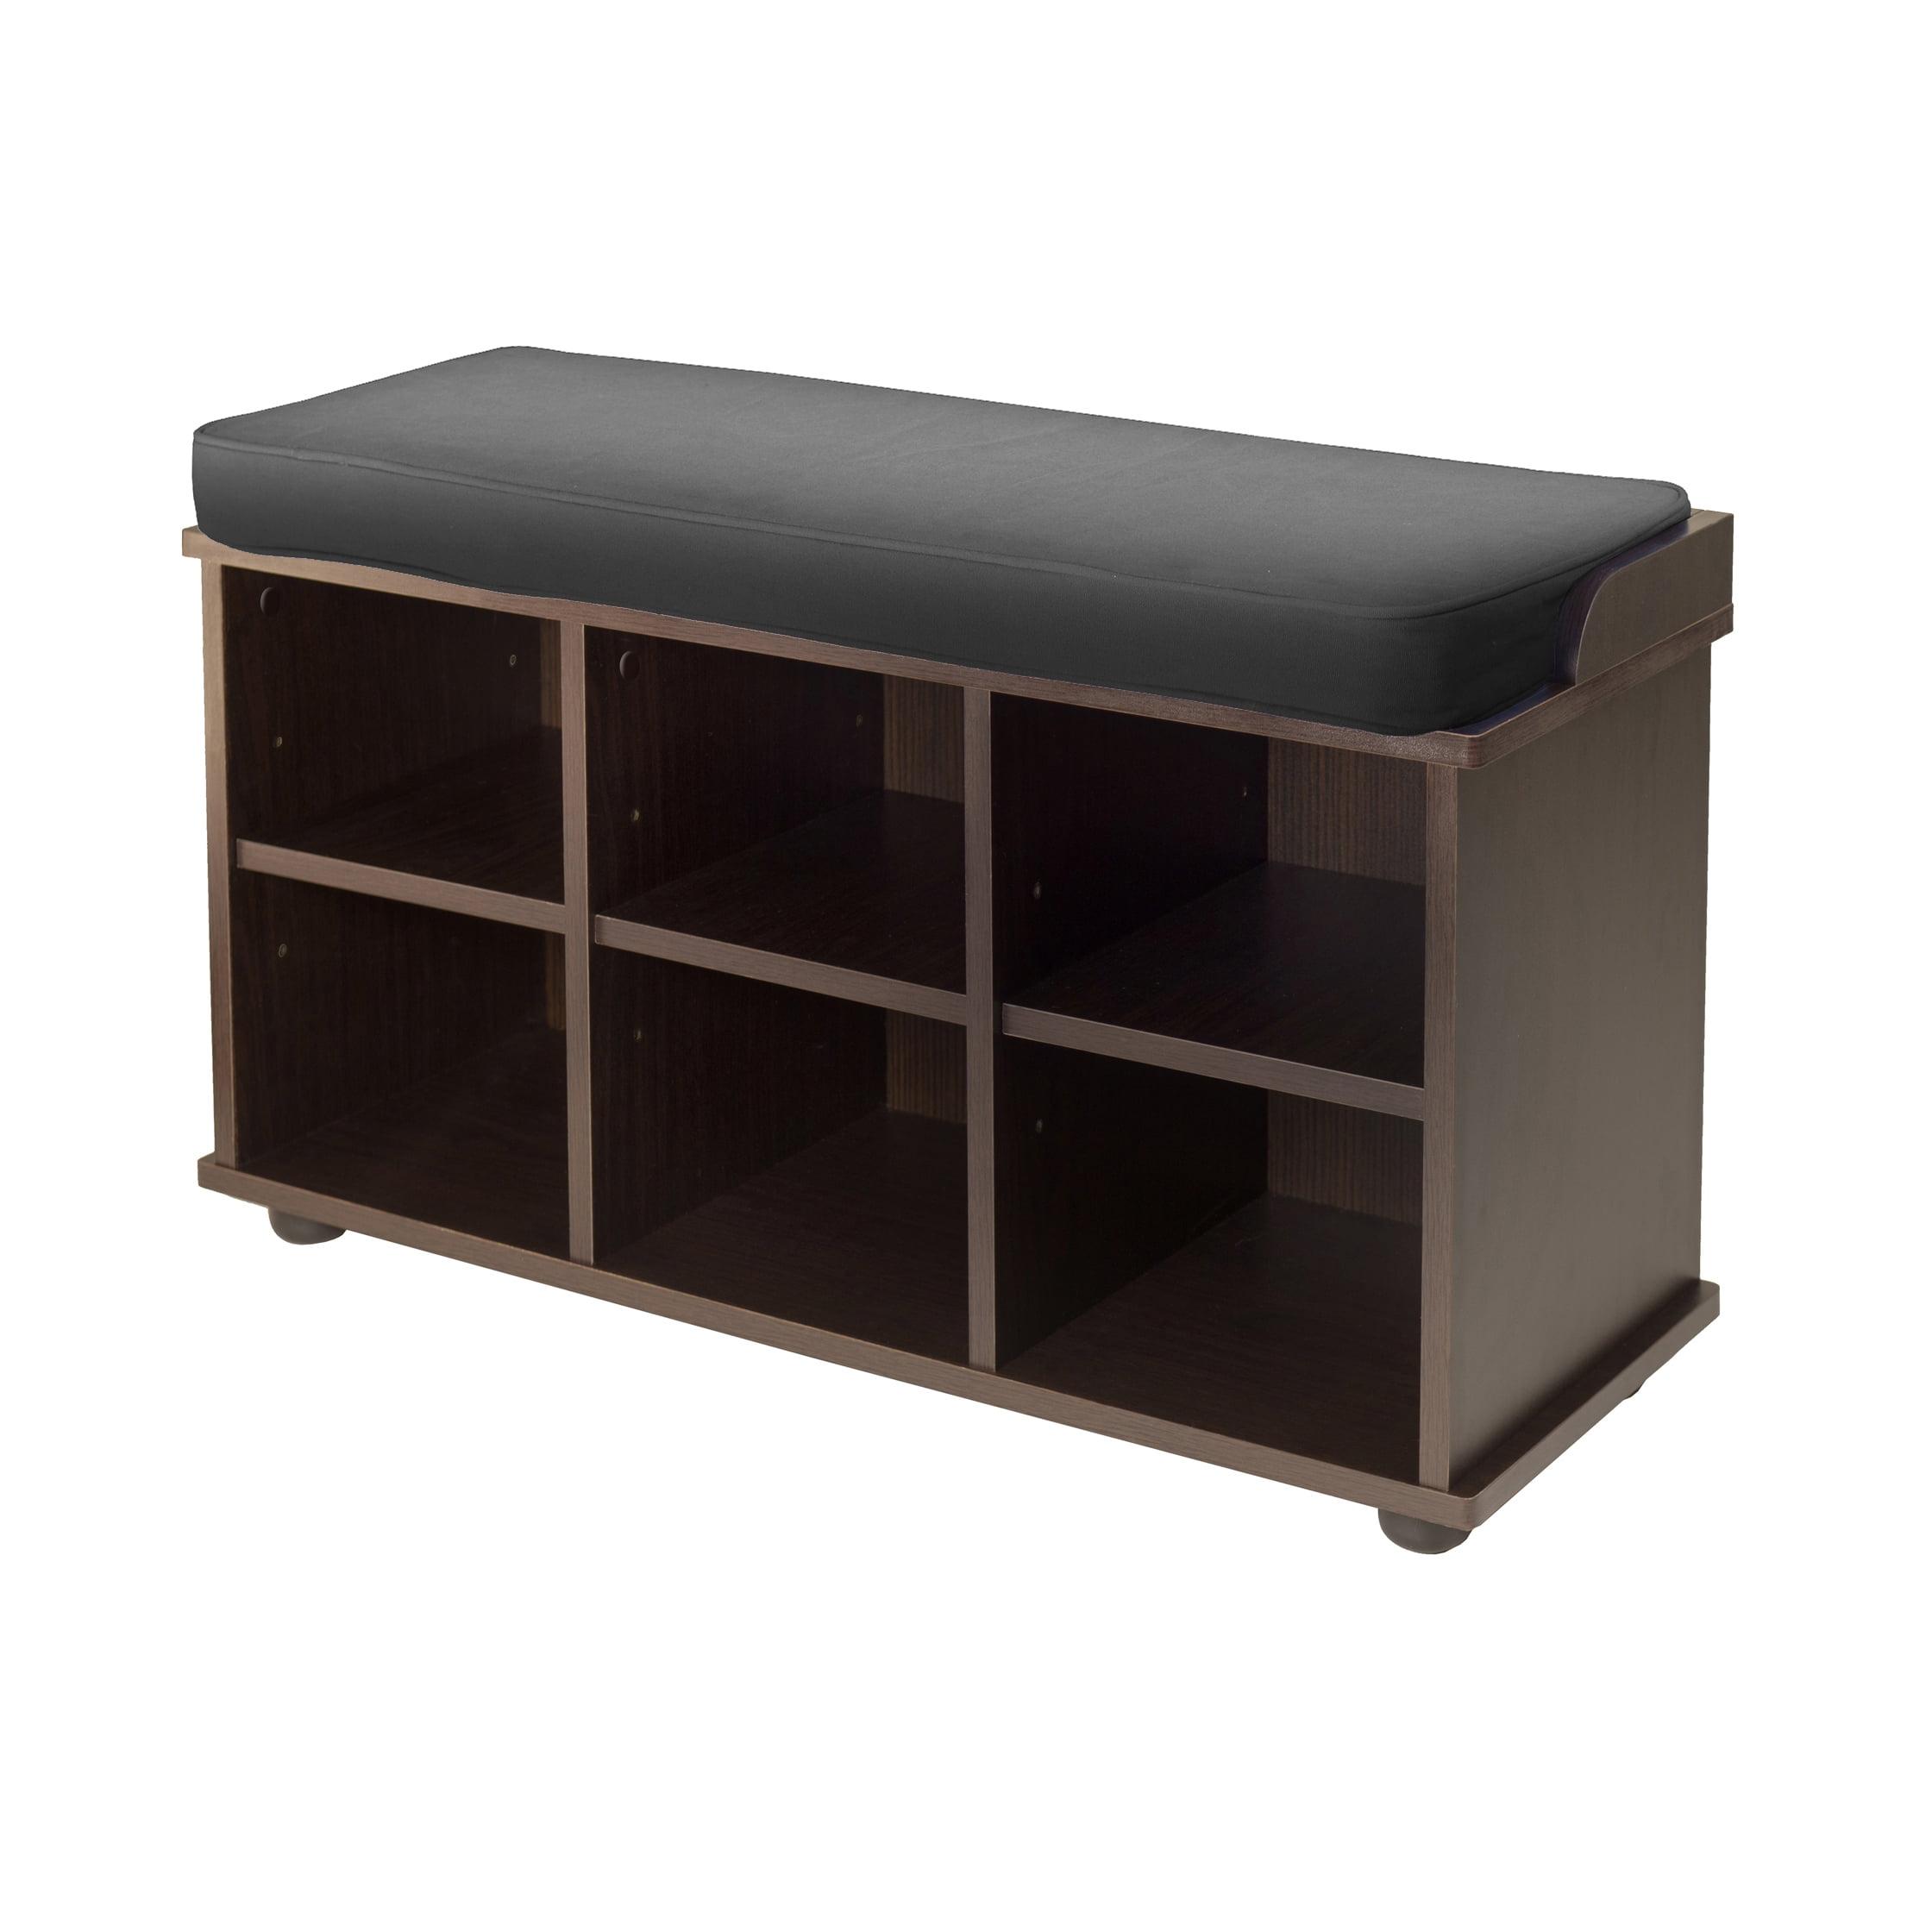 Transitional Townsend Espresso Storage Bench with Cushioned Seat